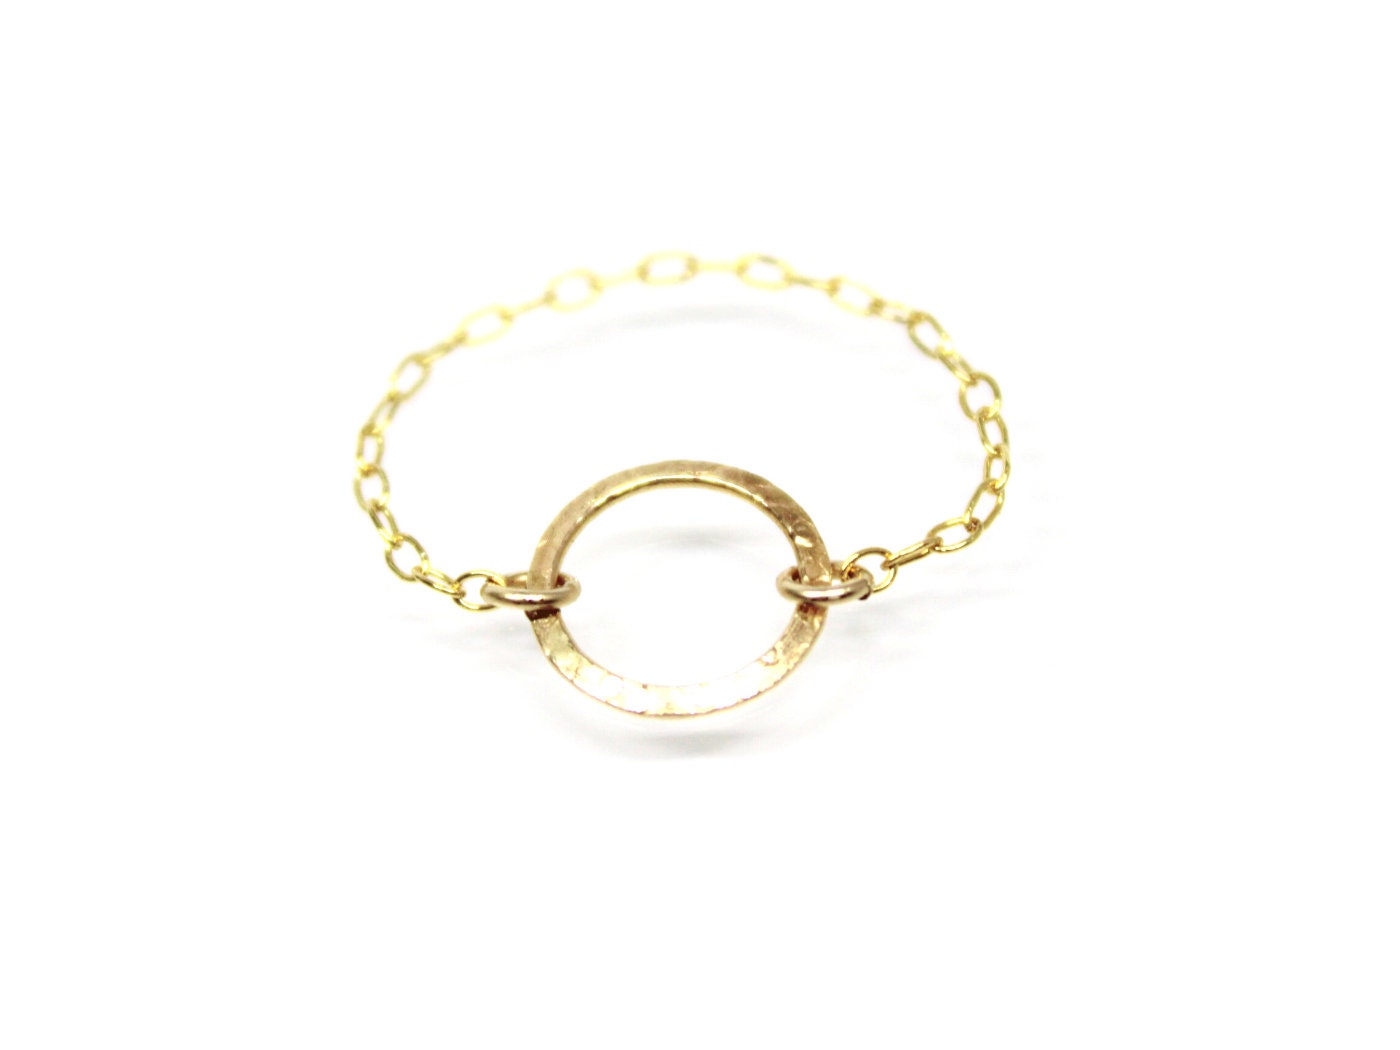  JULJEWELRY Chain Ring 14k Gold filled Silver or Rose